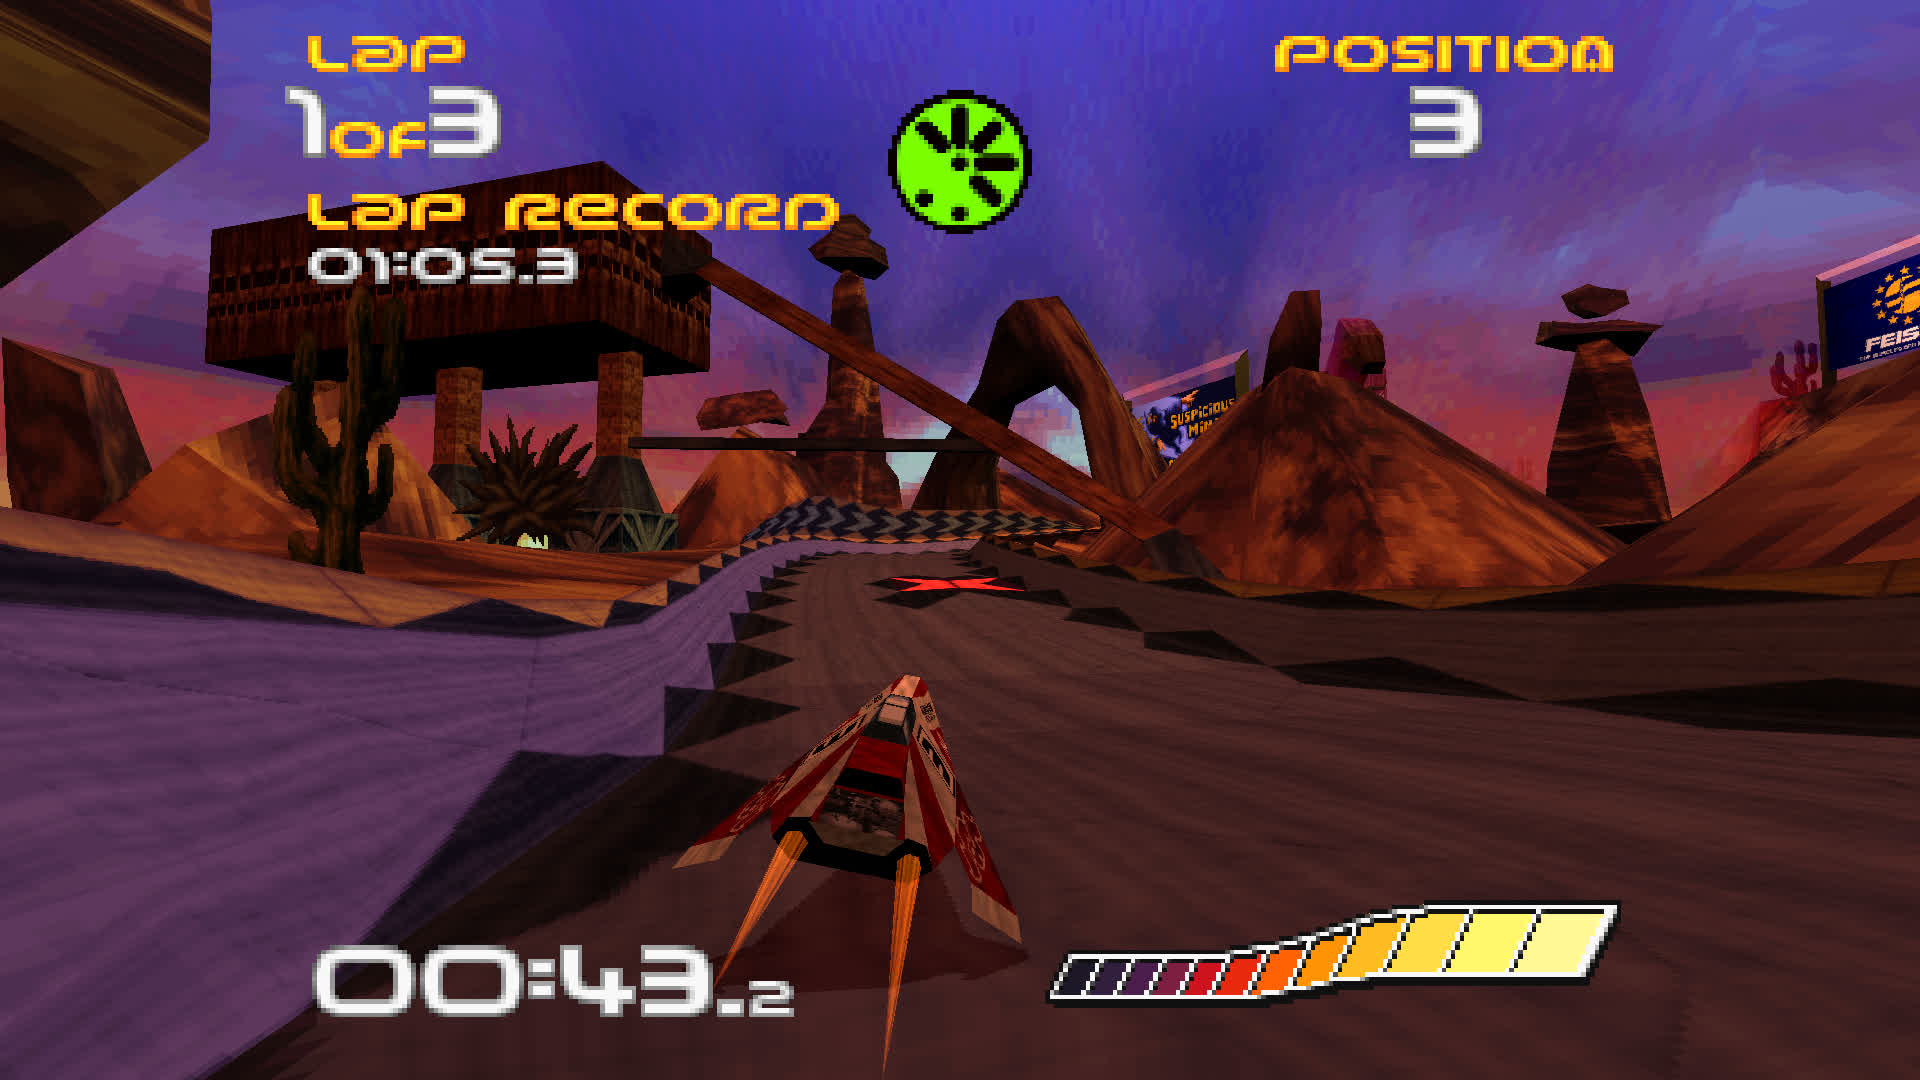 After source code leak, WipeOut gets unofficial ports that can be played on a web browser